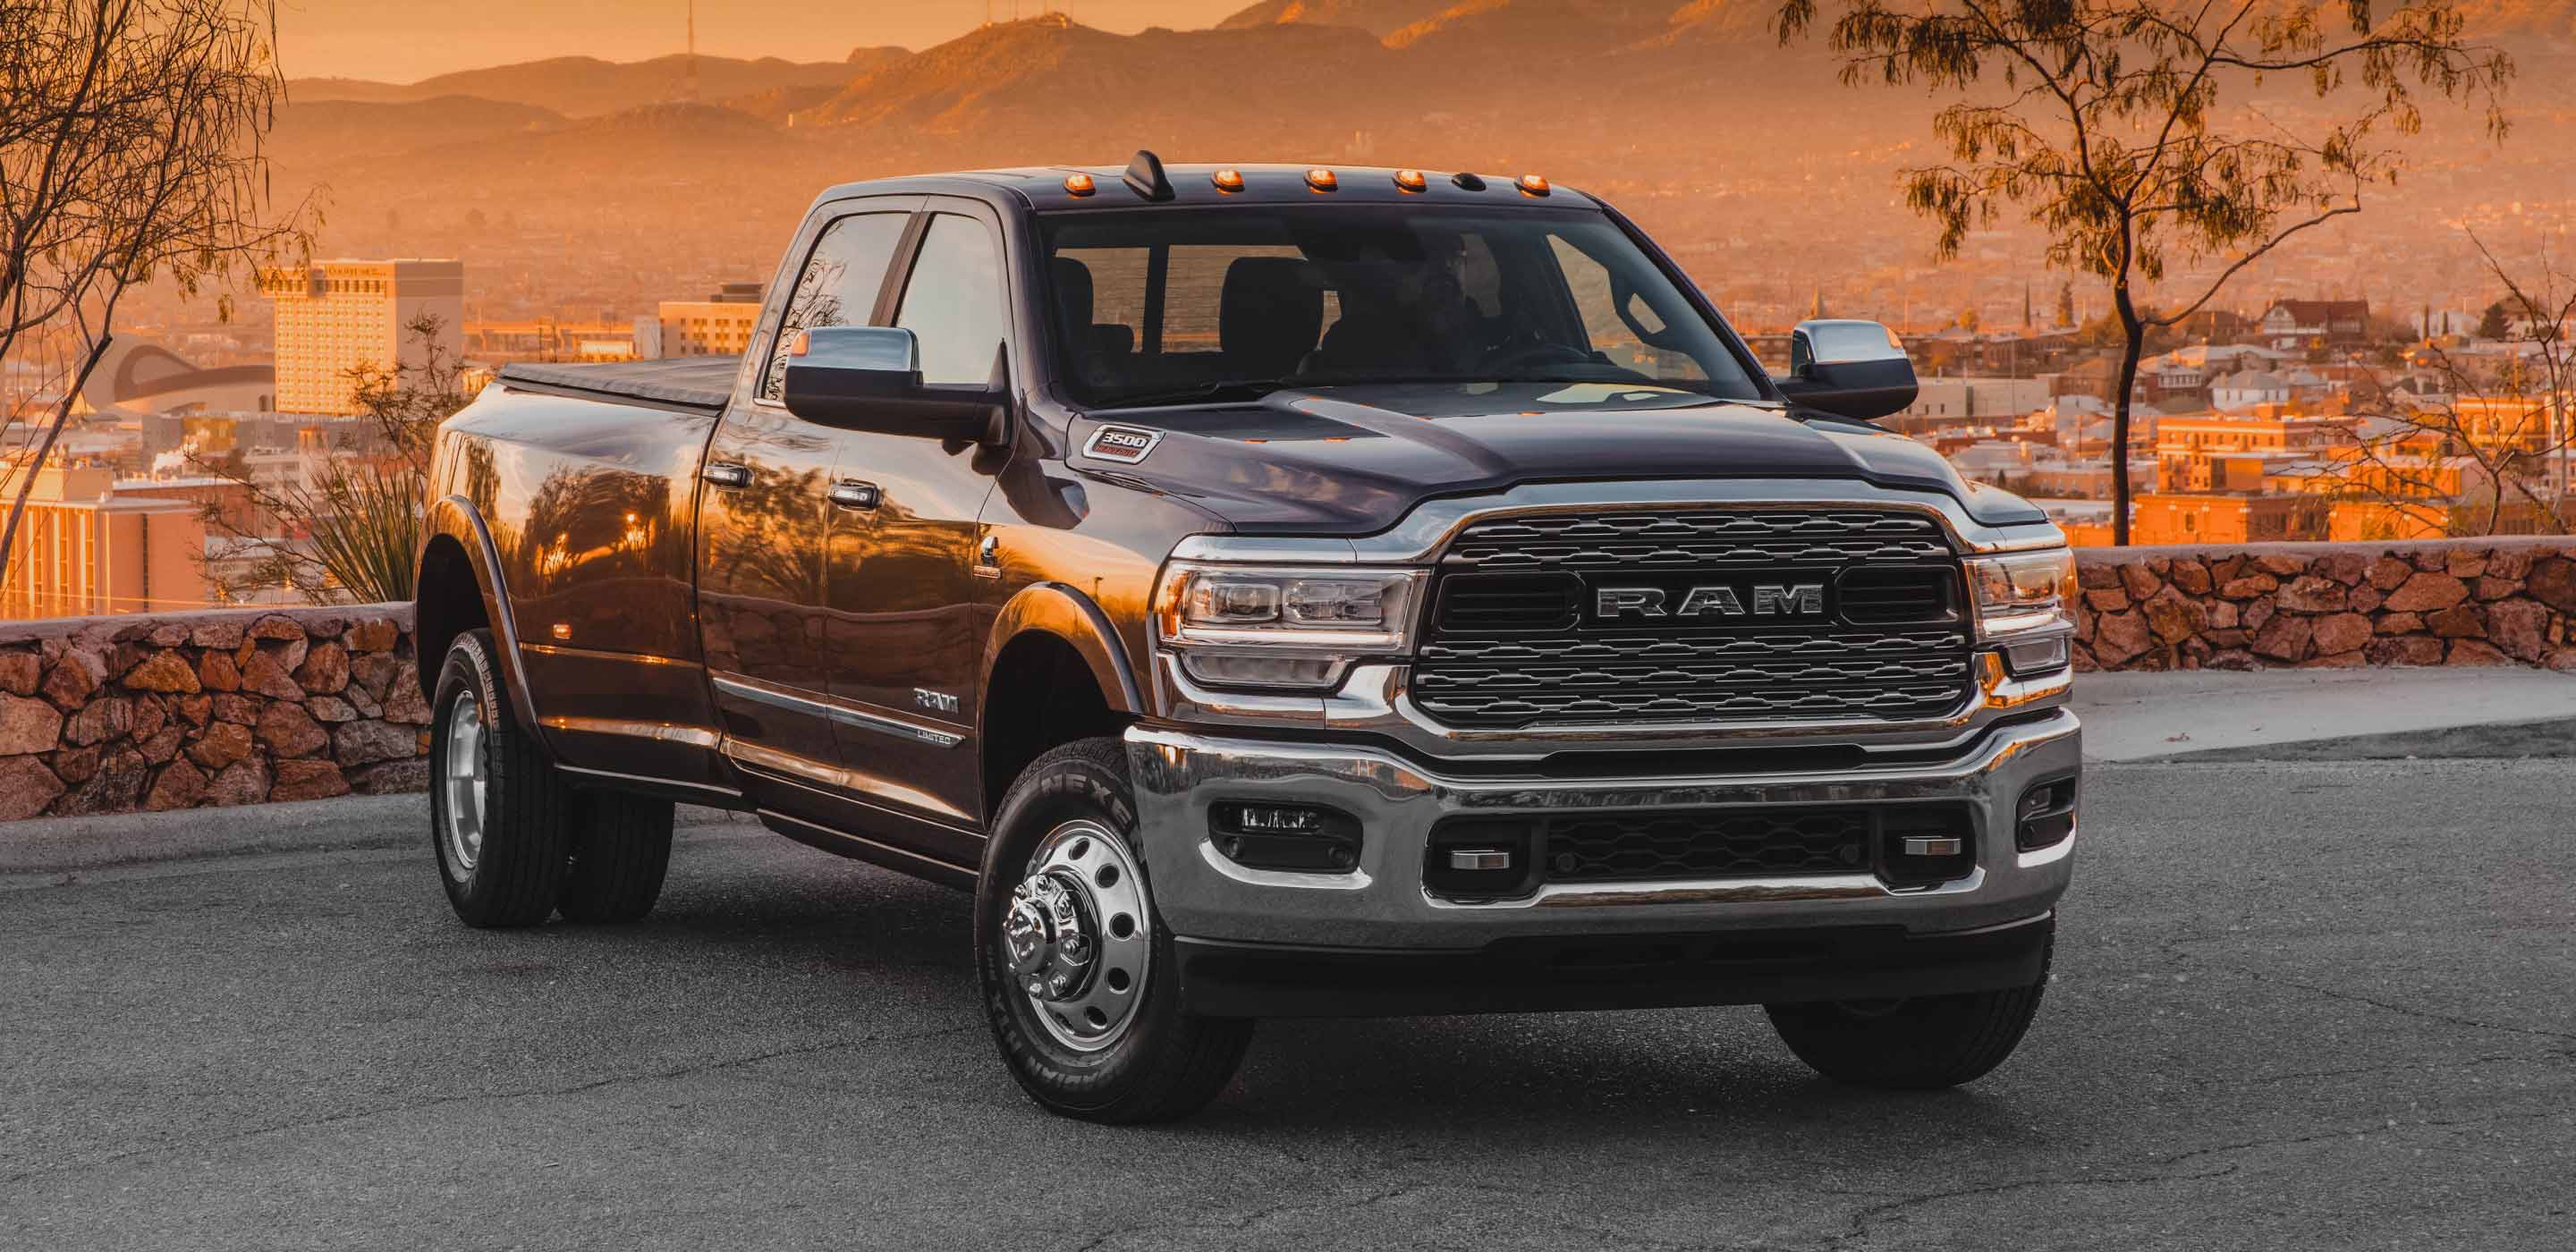 Display The 2022 Ram 3500 parked at a lookout point at sunset.